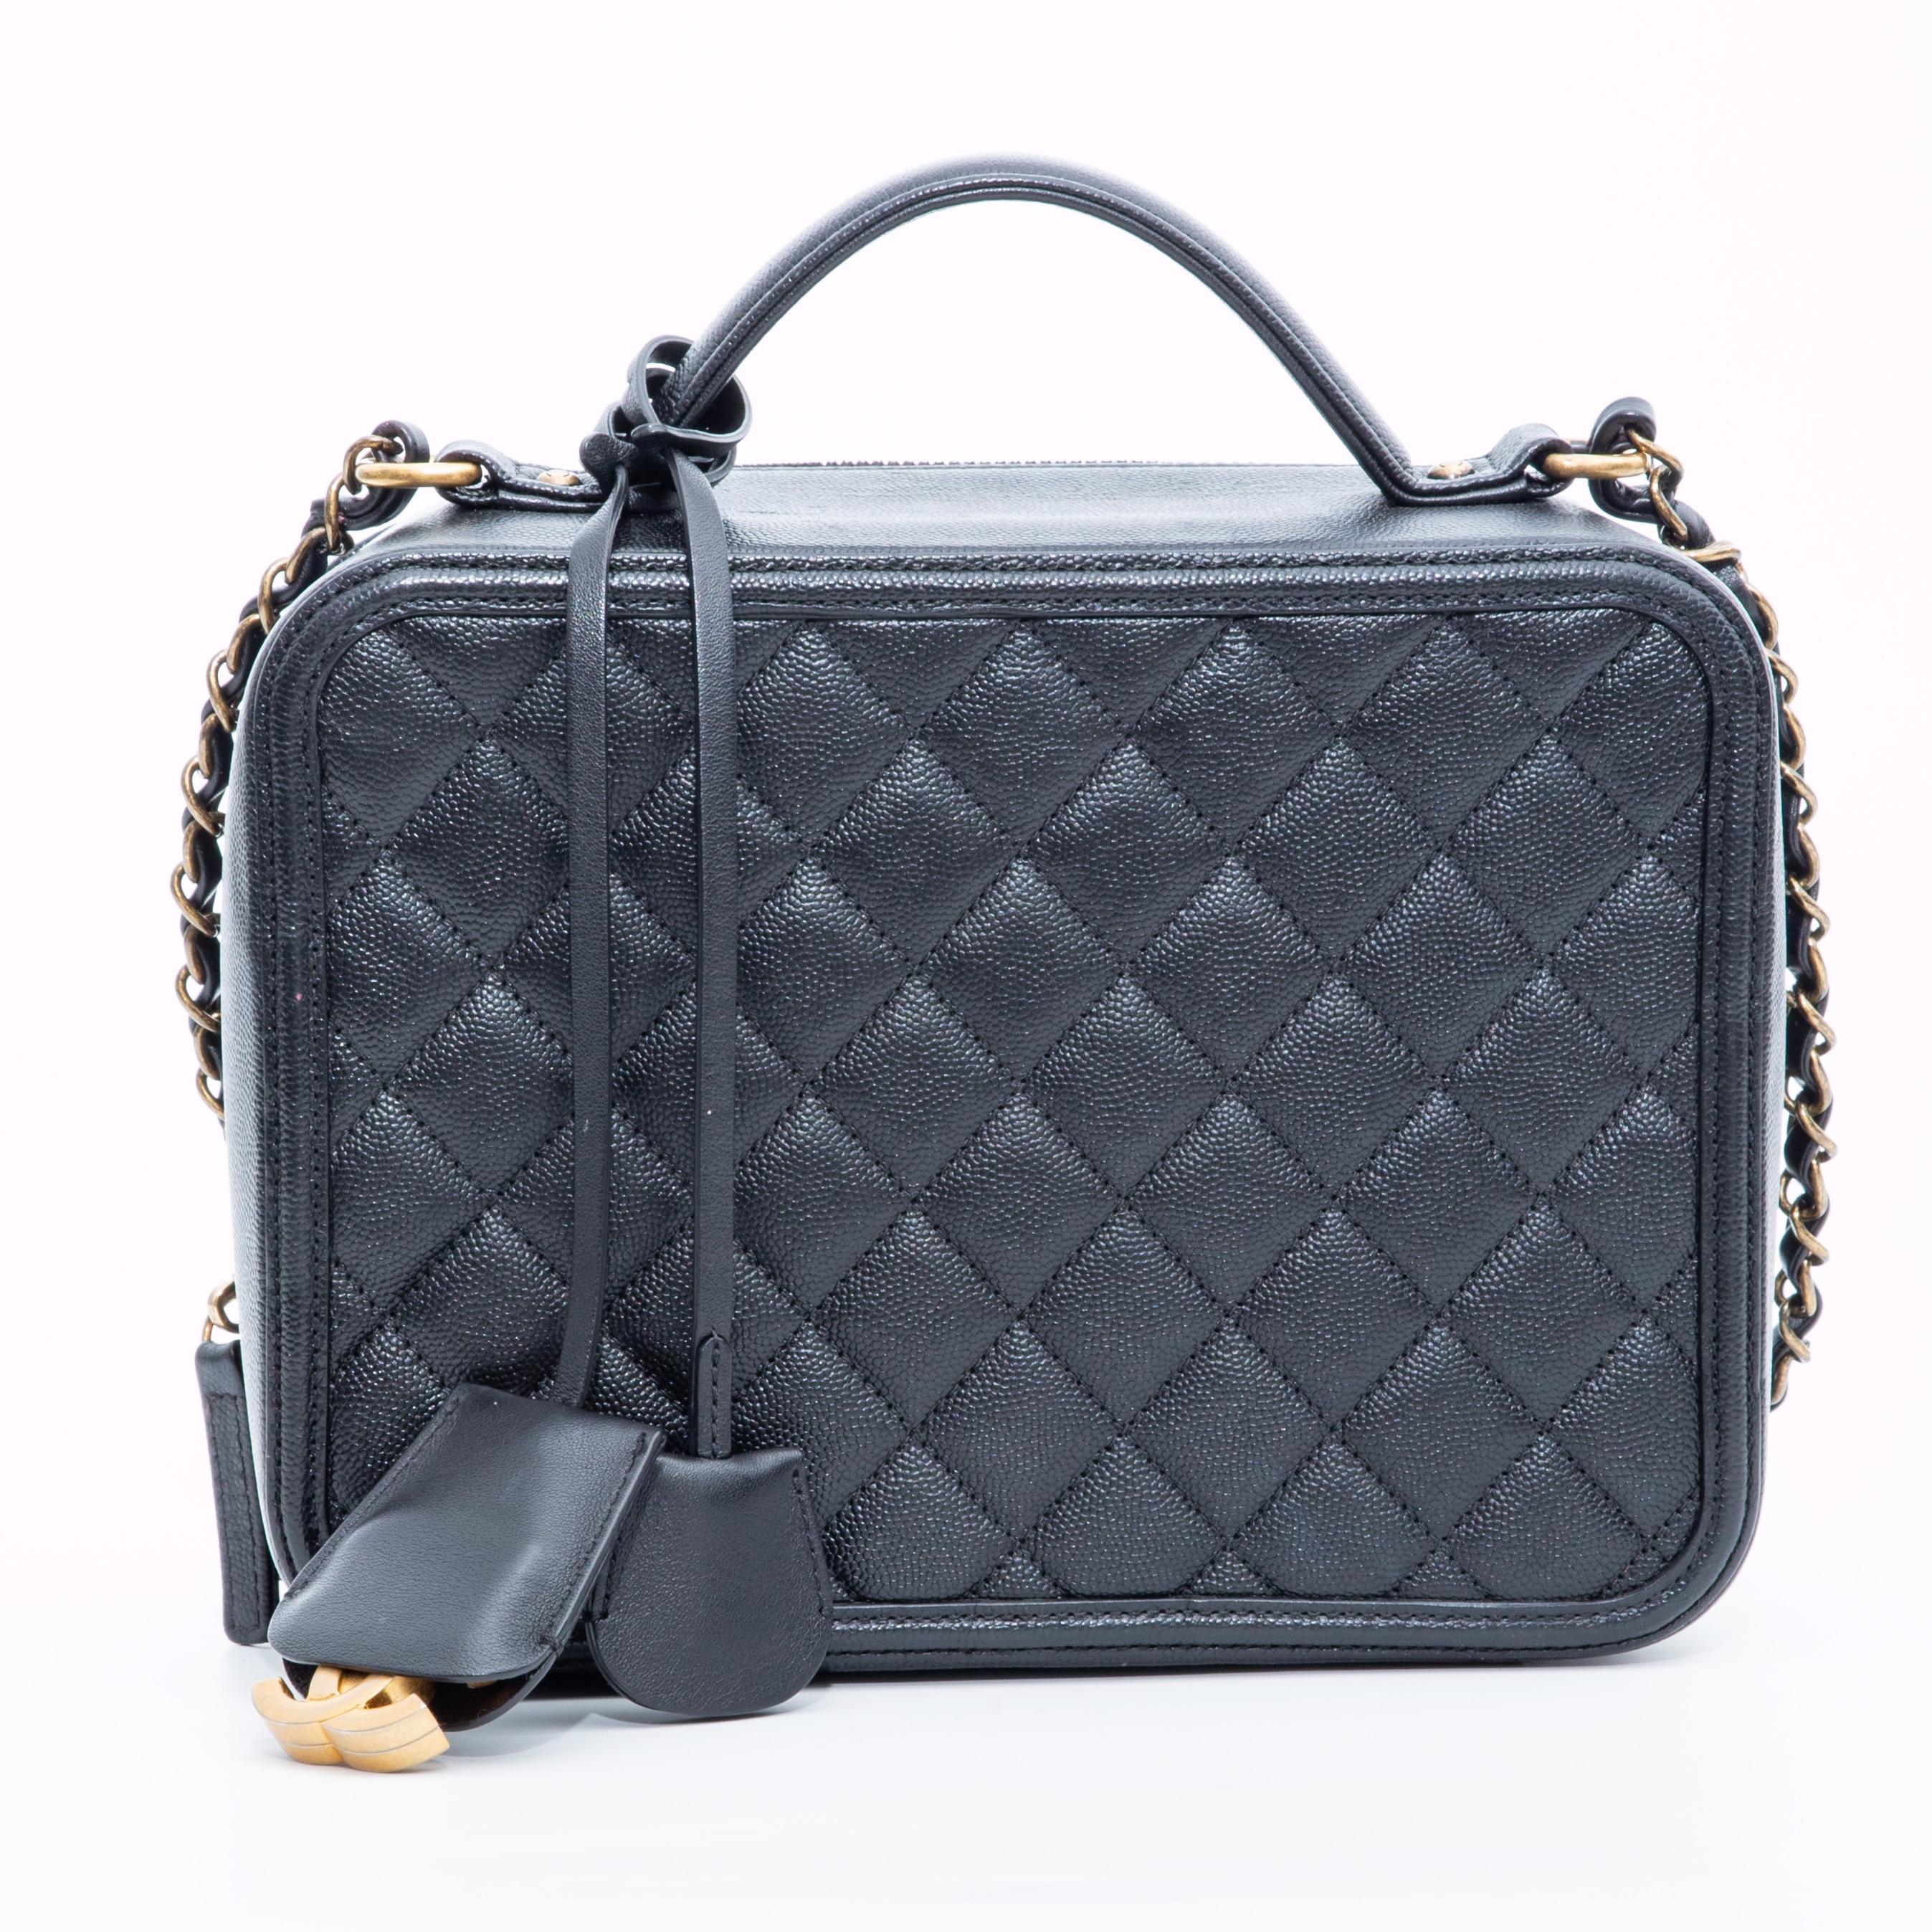 This Chanel CC Filigree Vanity Case is made with diamond quilted caviar leather in black. The bag features gold toned hardware, an embroidered CC at the front face, a gold toned chain interlaced with leather, a single flat leather top handle, and